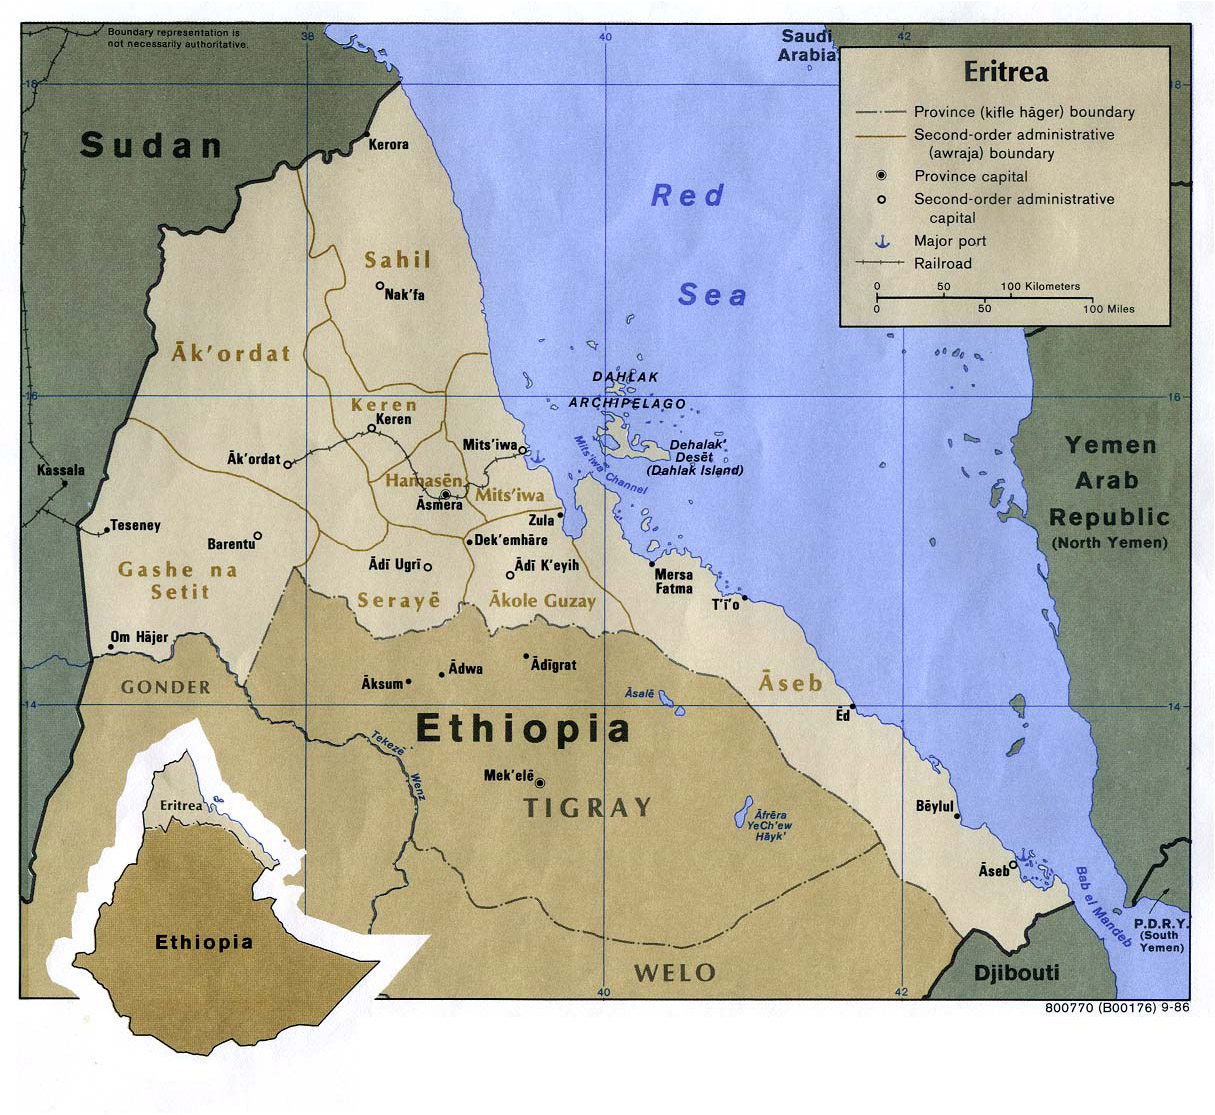 Detailed political map of Eritrea with roads, railroads, ports and